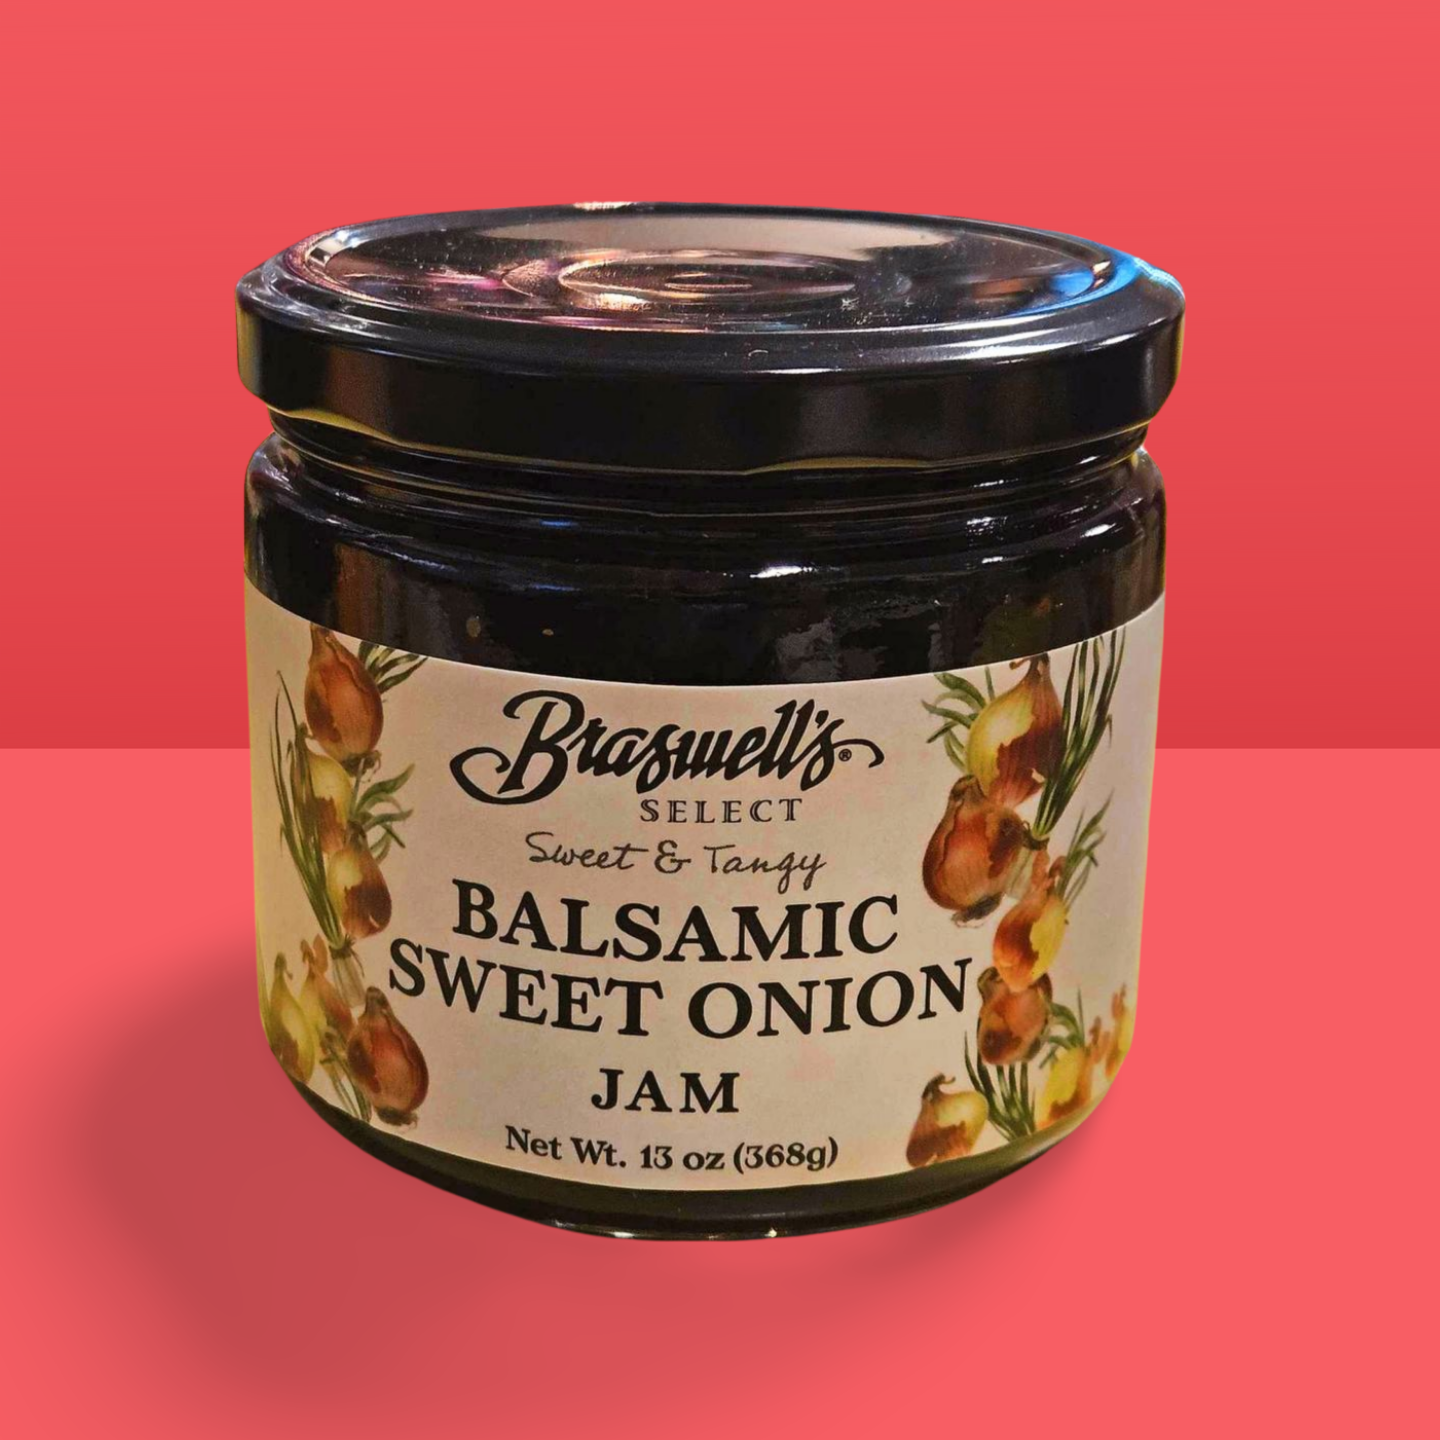 Braswell's Select Balsamic Sweet Onion Jam 13 OZ - Dusty's Country Store